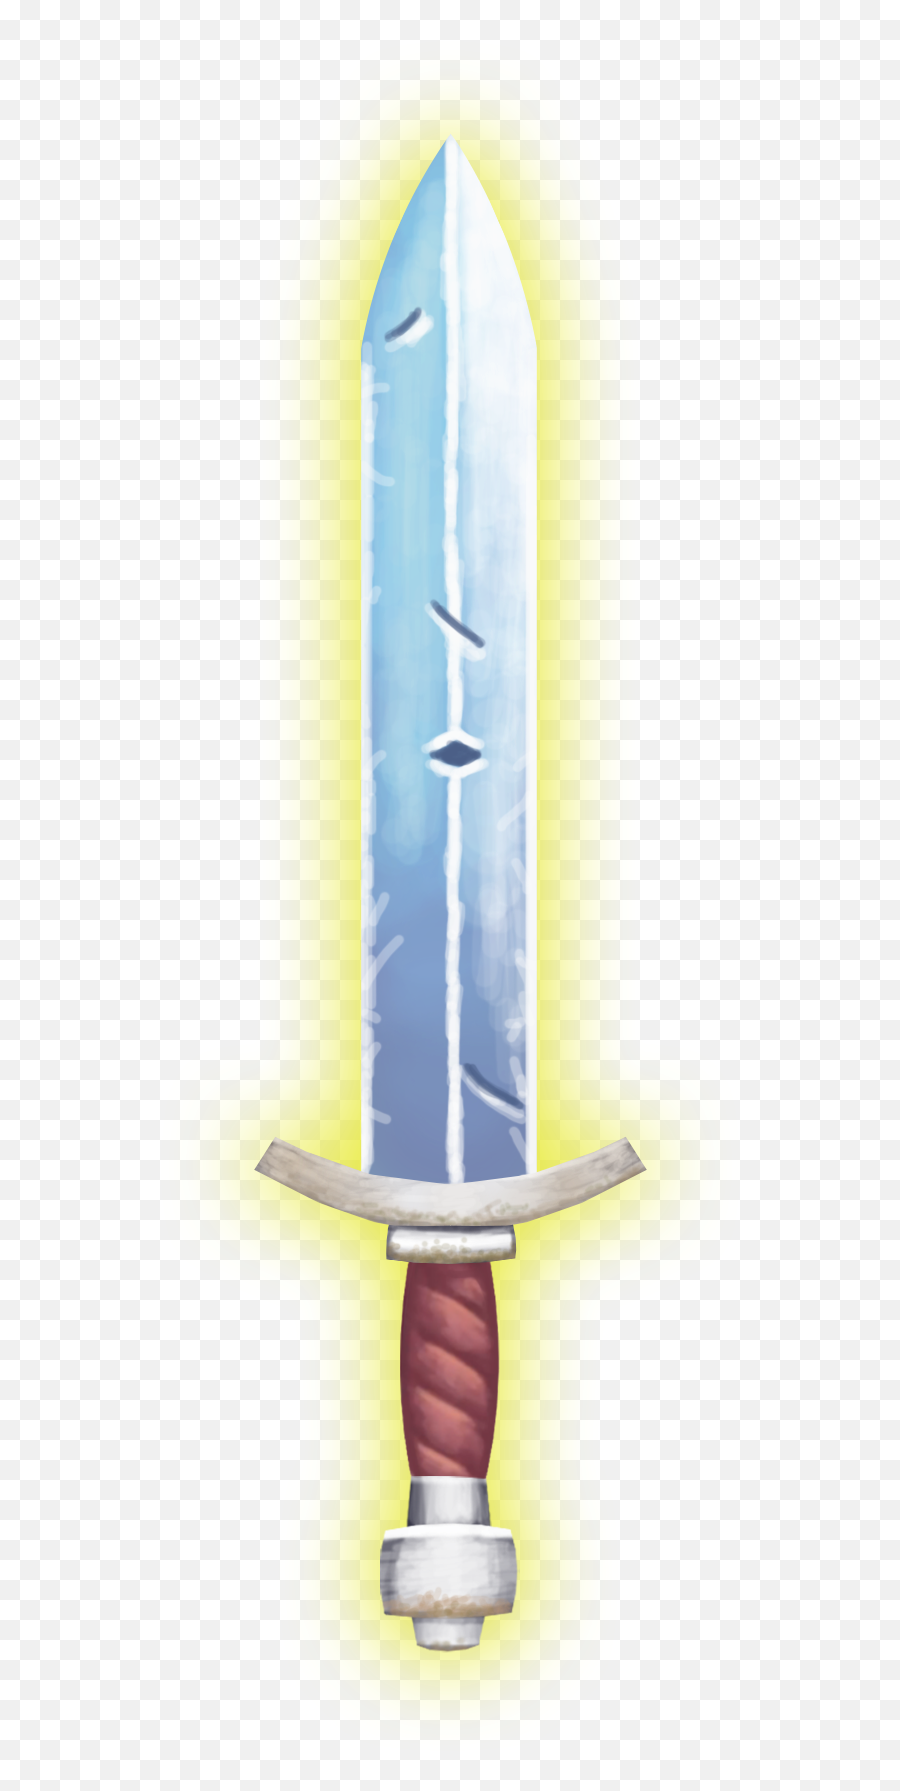 Drew A Diamond Sword 3 Hours On Photoshop With Mouse And - Collectible Sword Emoji,Diamond Sword Png